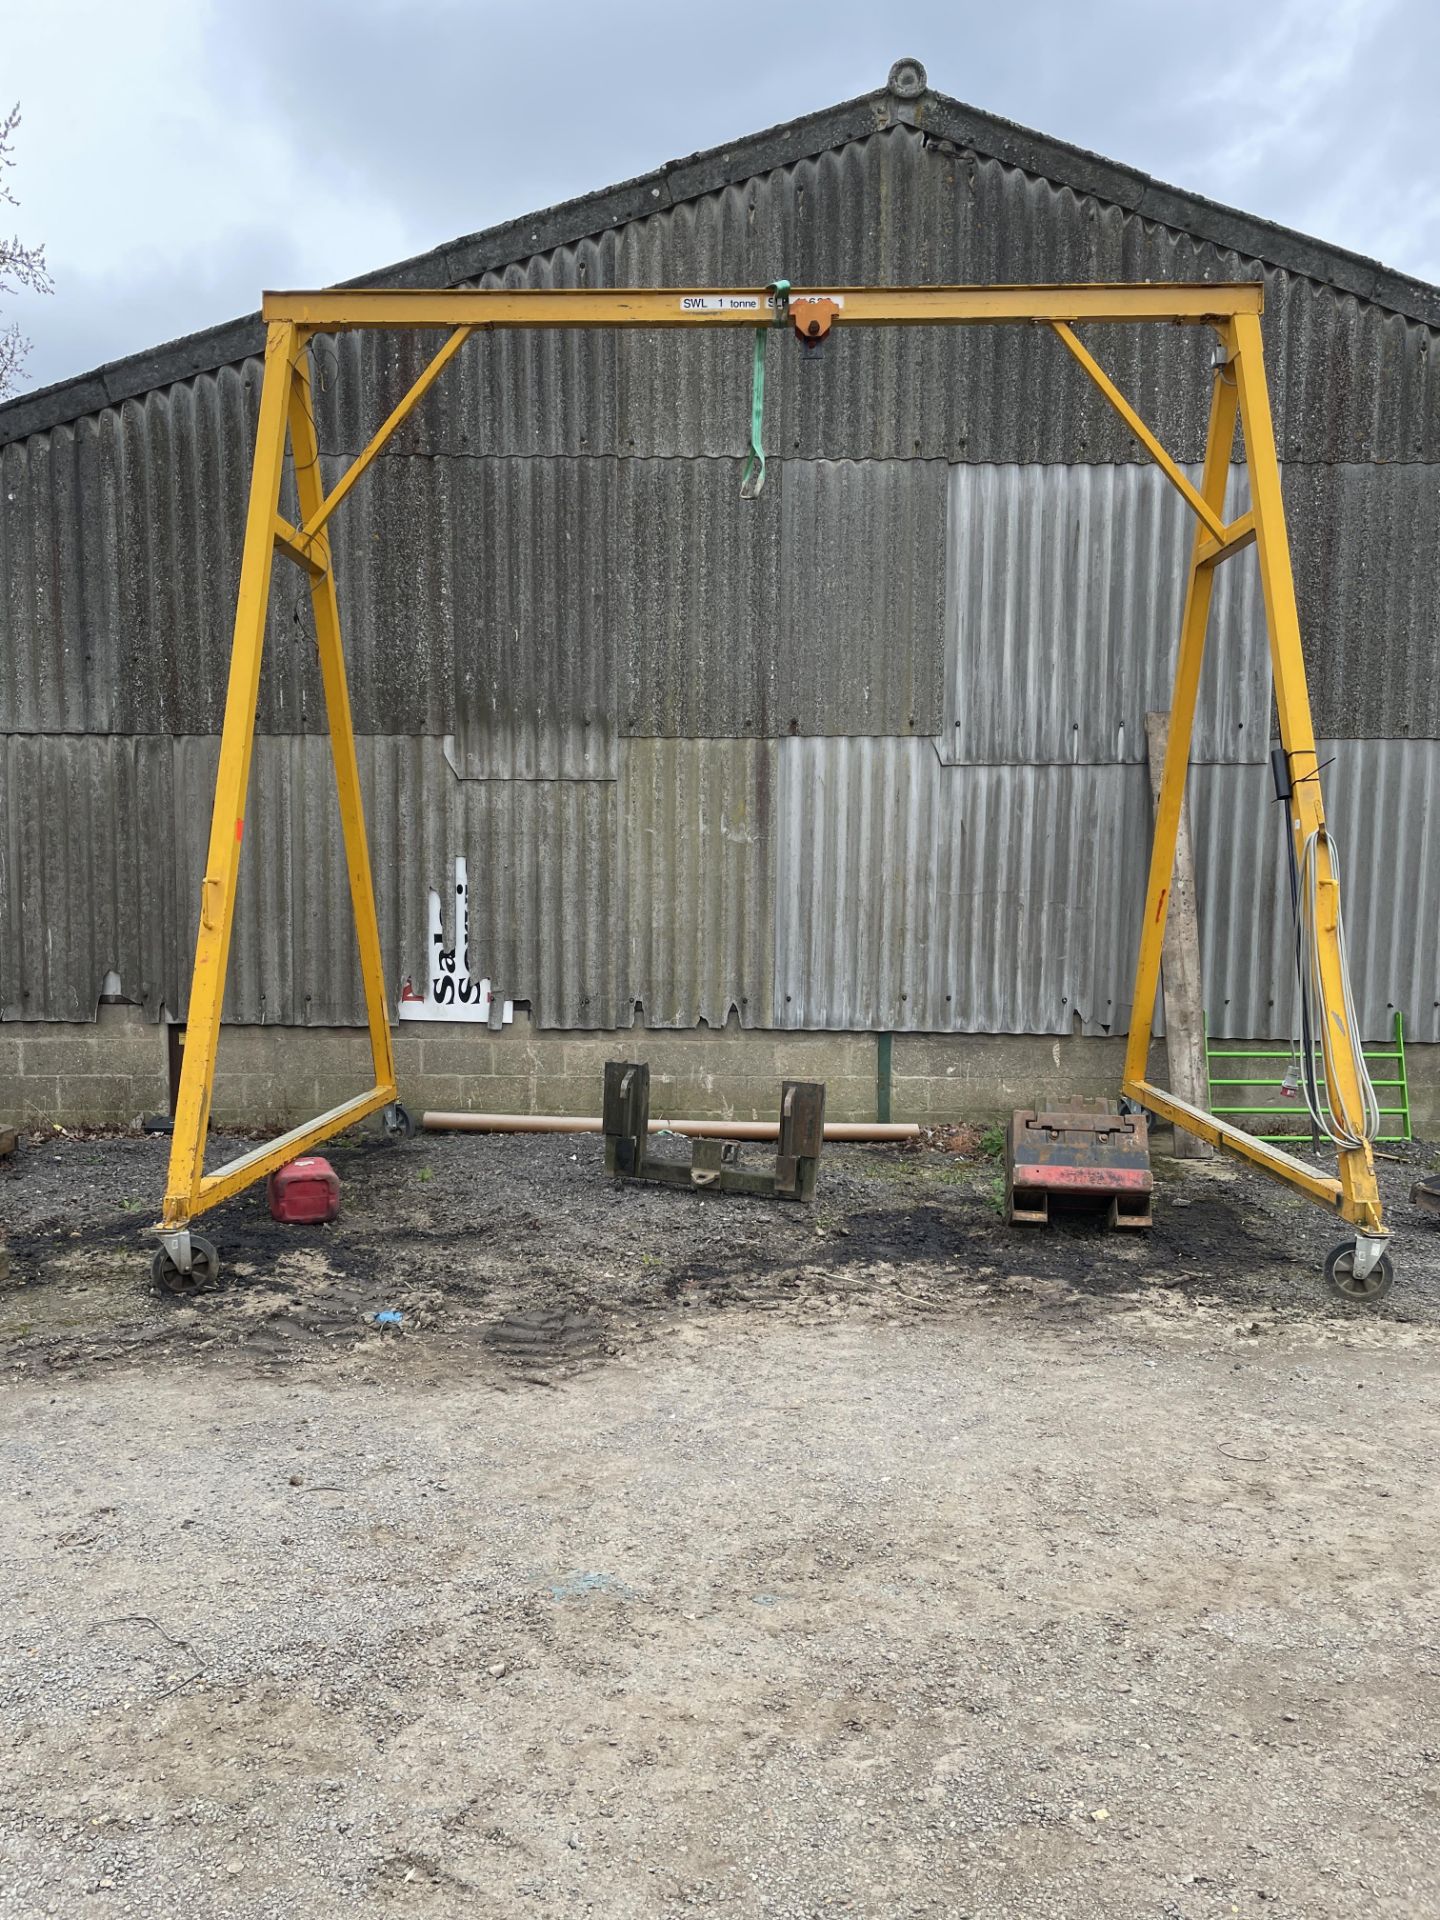 1: Mobile Overhead SWL 1 Tonne Gantry Frame Approx 4.8m (W) x 4.3m (H) with Street W 1000 11 V2 Type